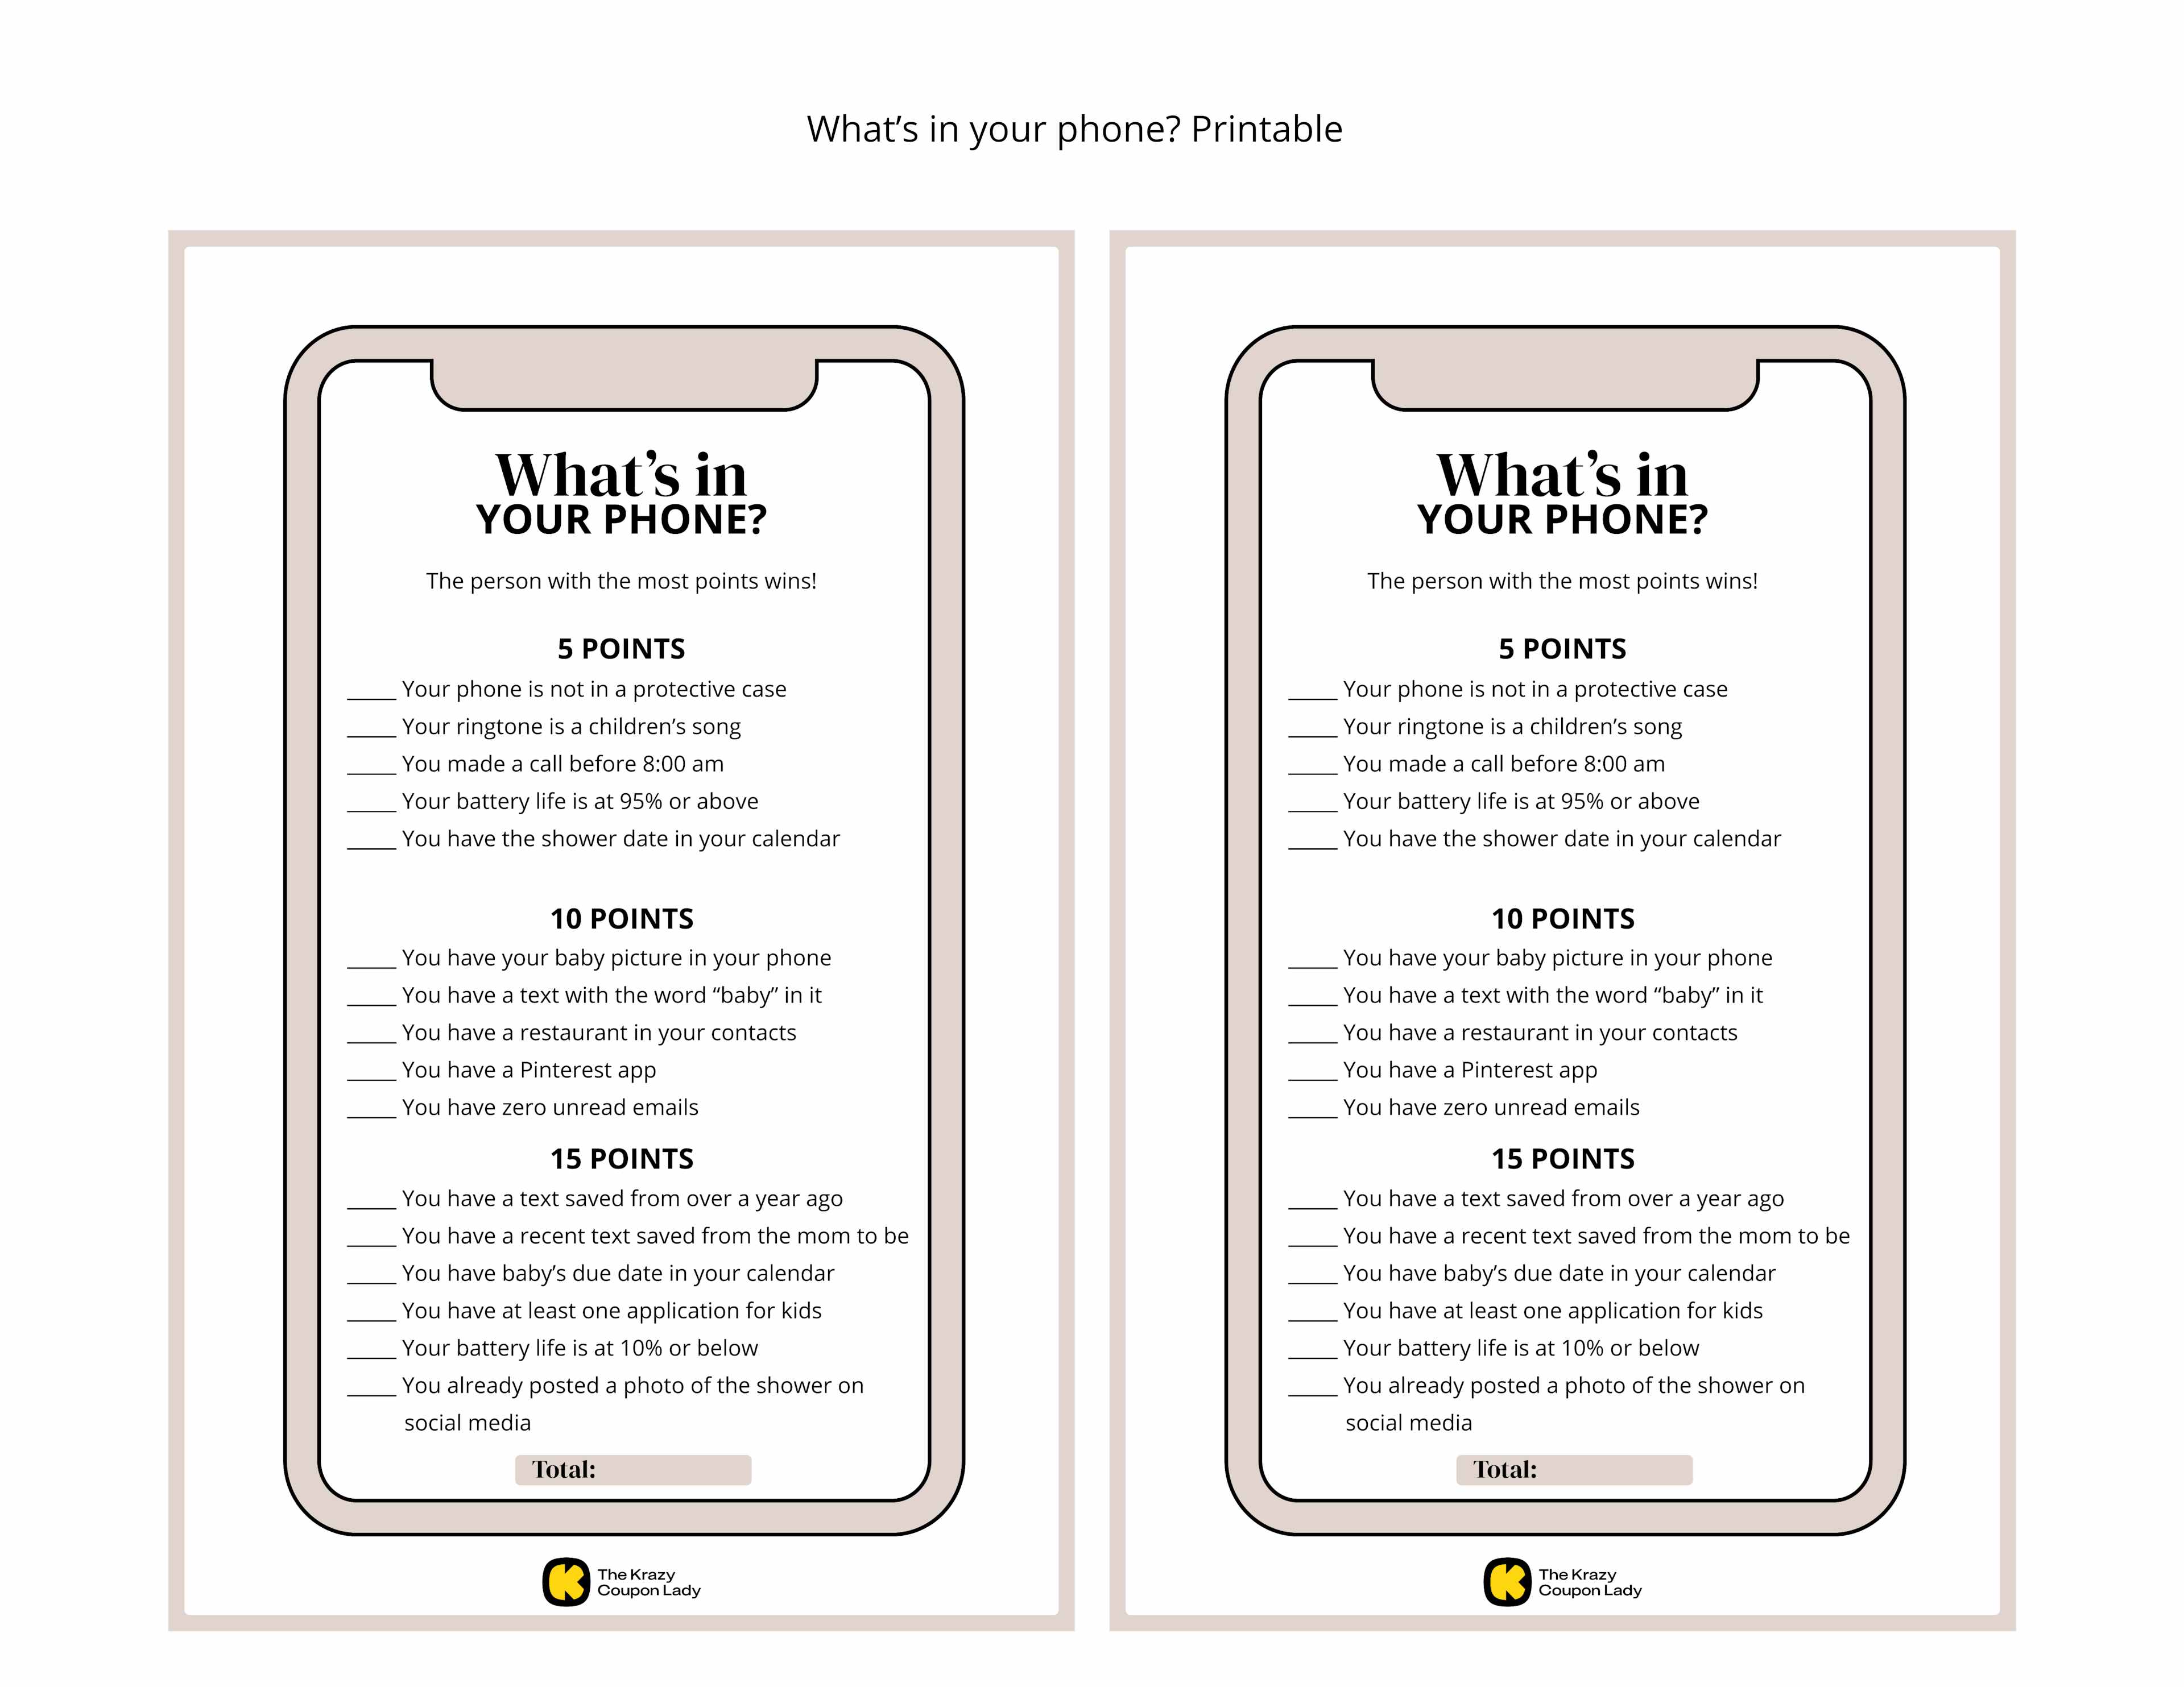 What’s in your phone game printable